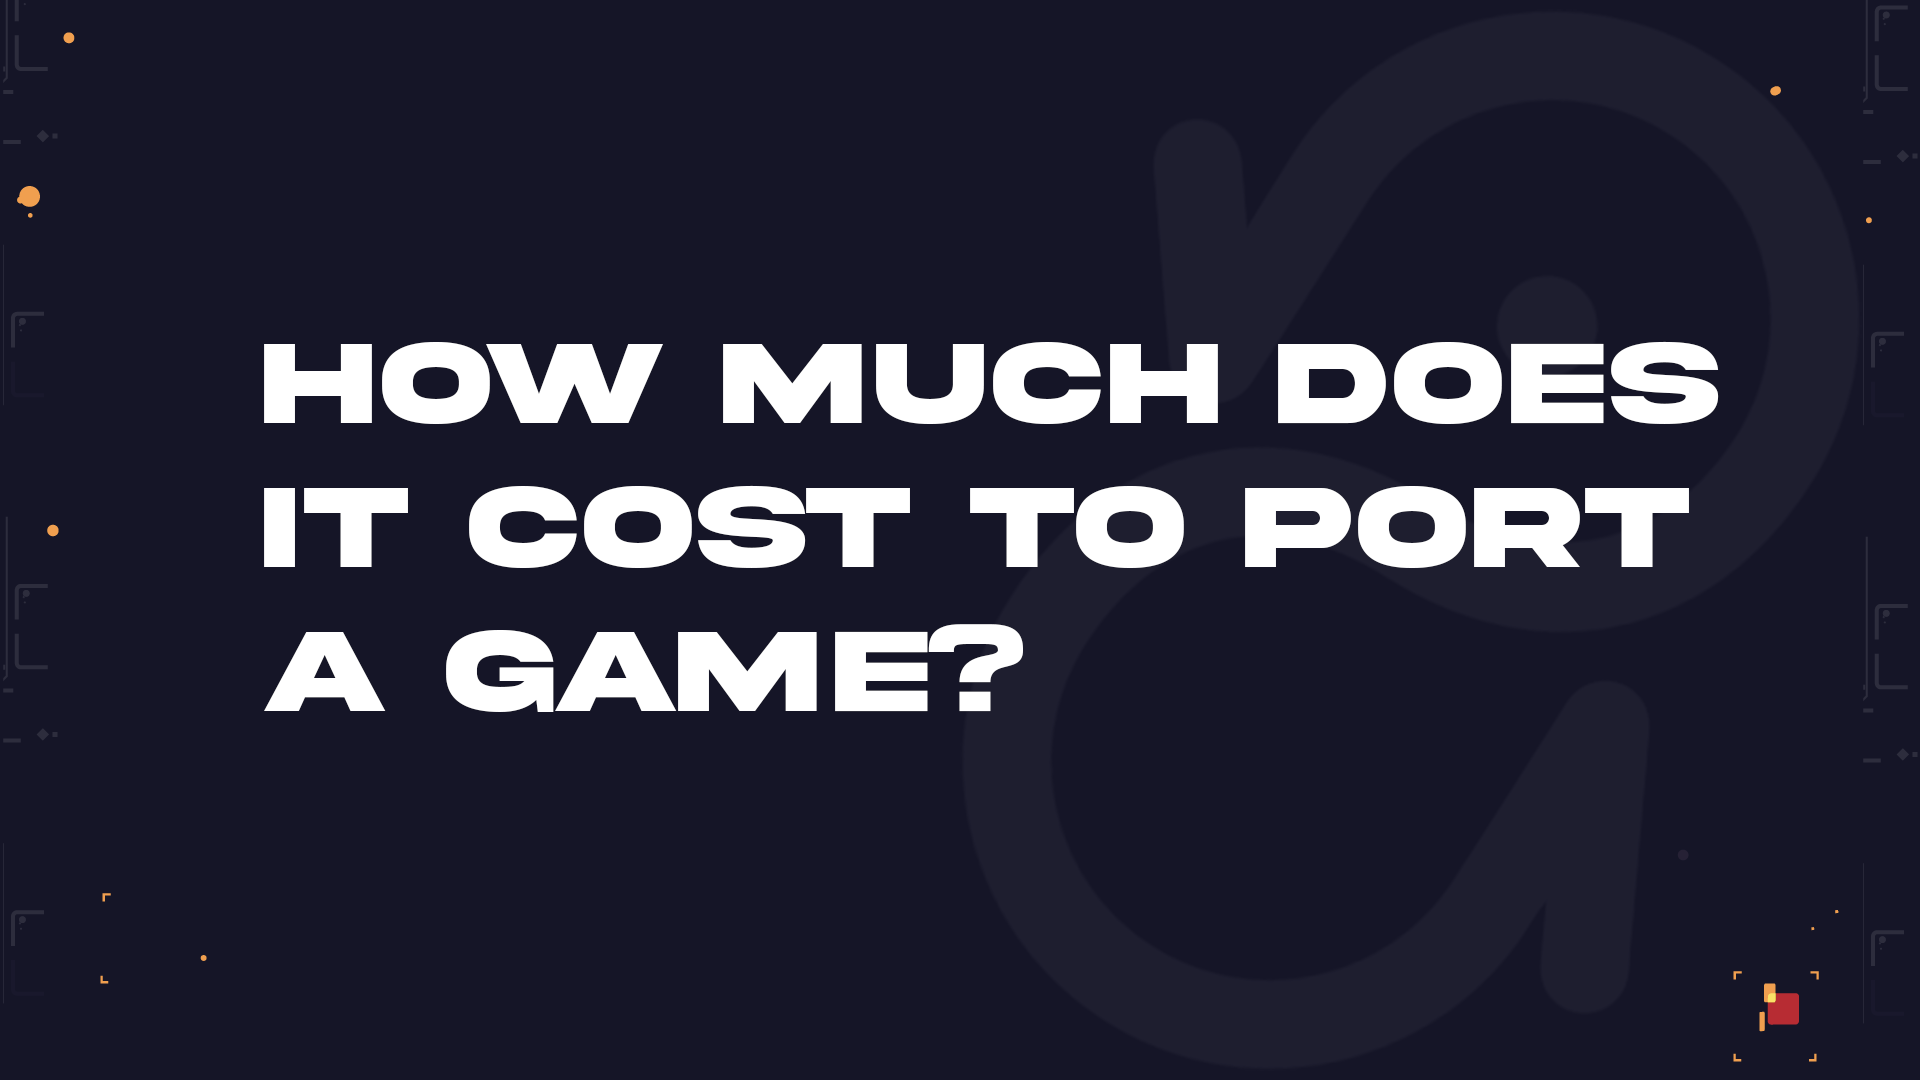 How Much Does it Cost to Port a Game?